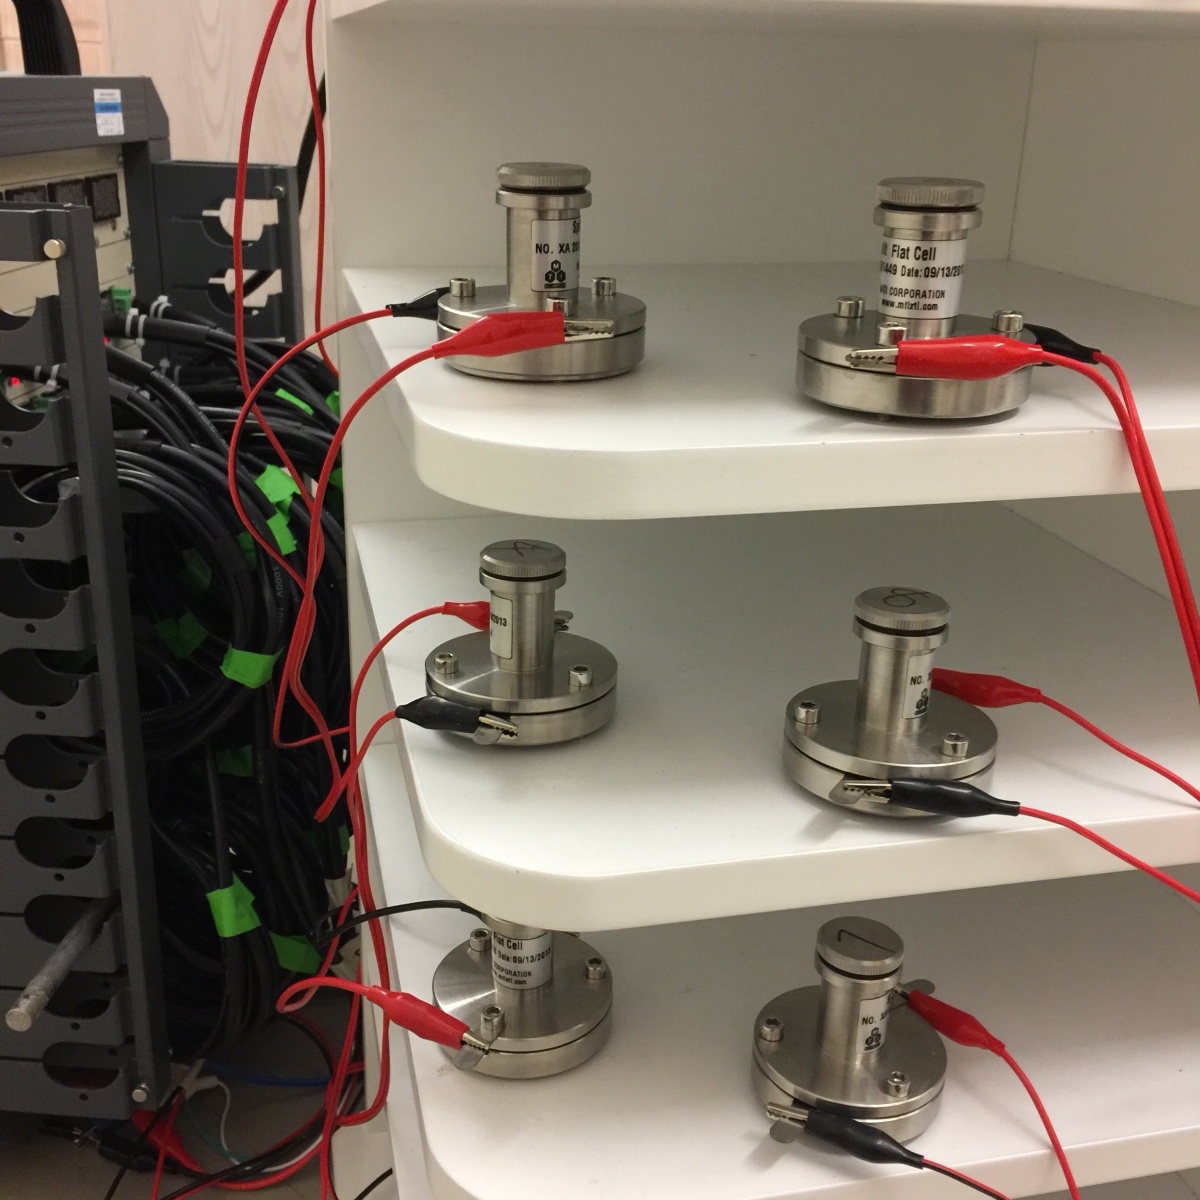 batteries on a shelf in a lab